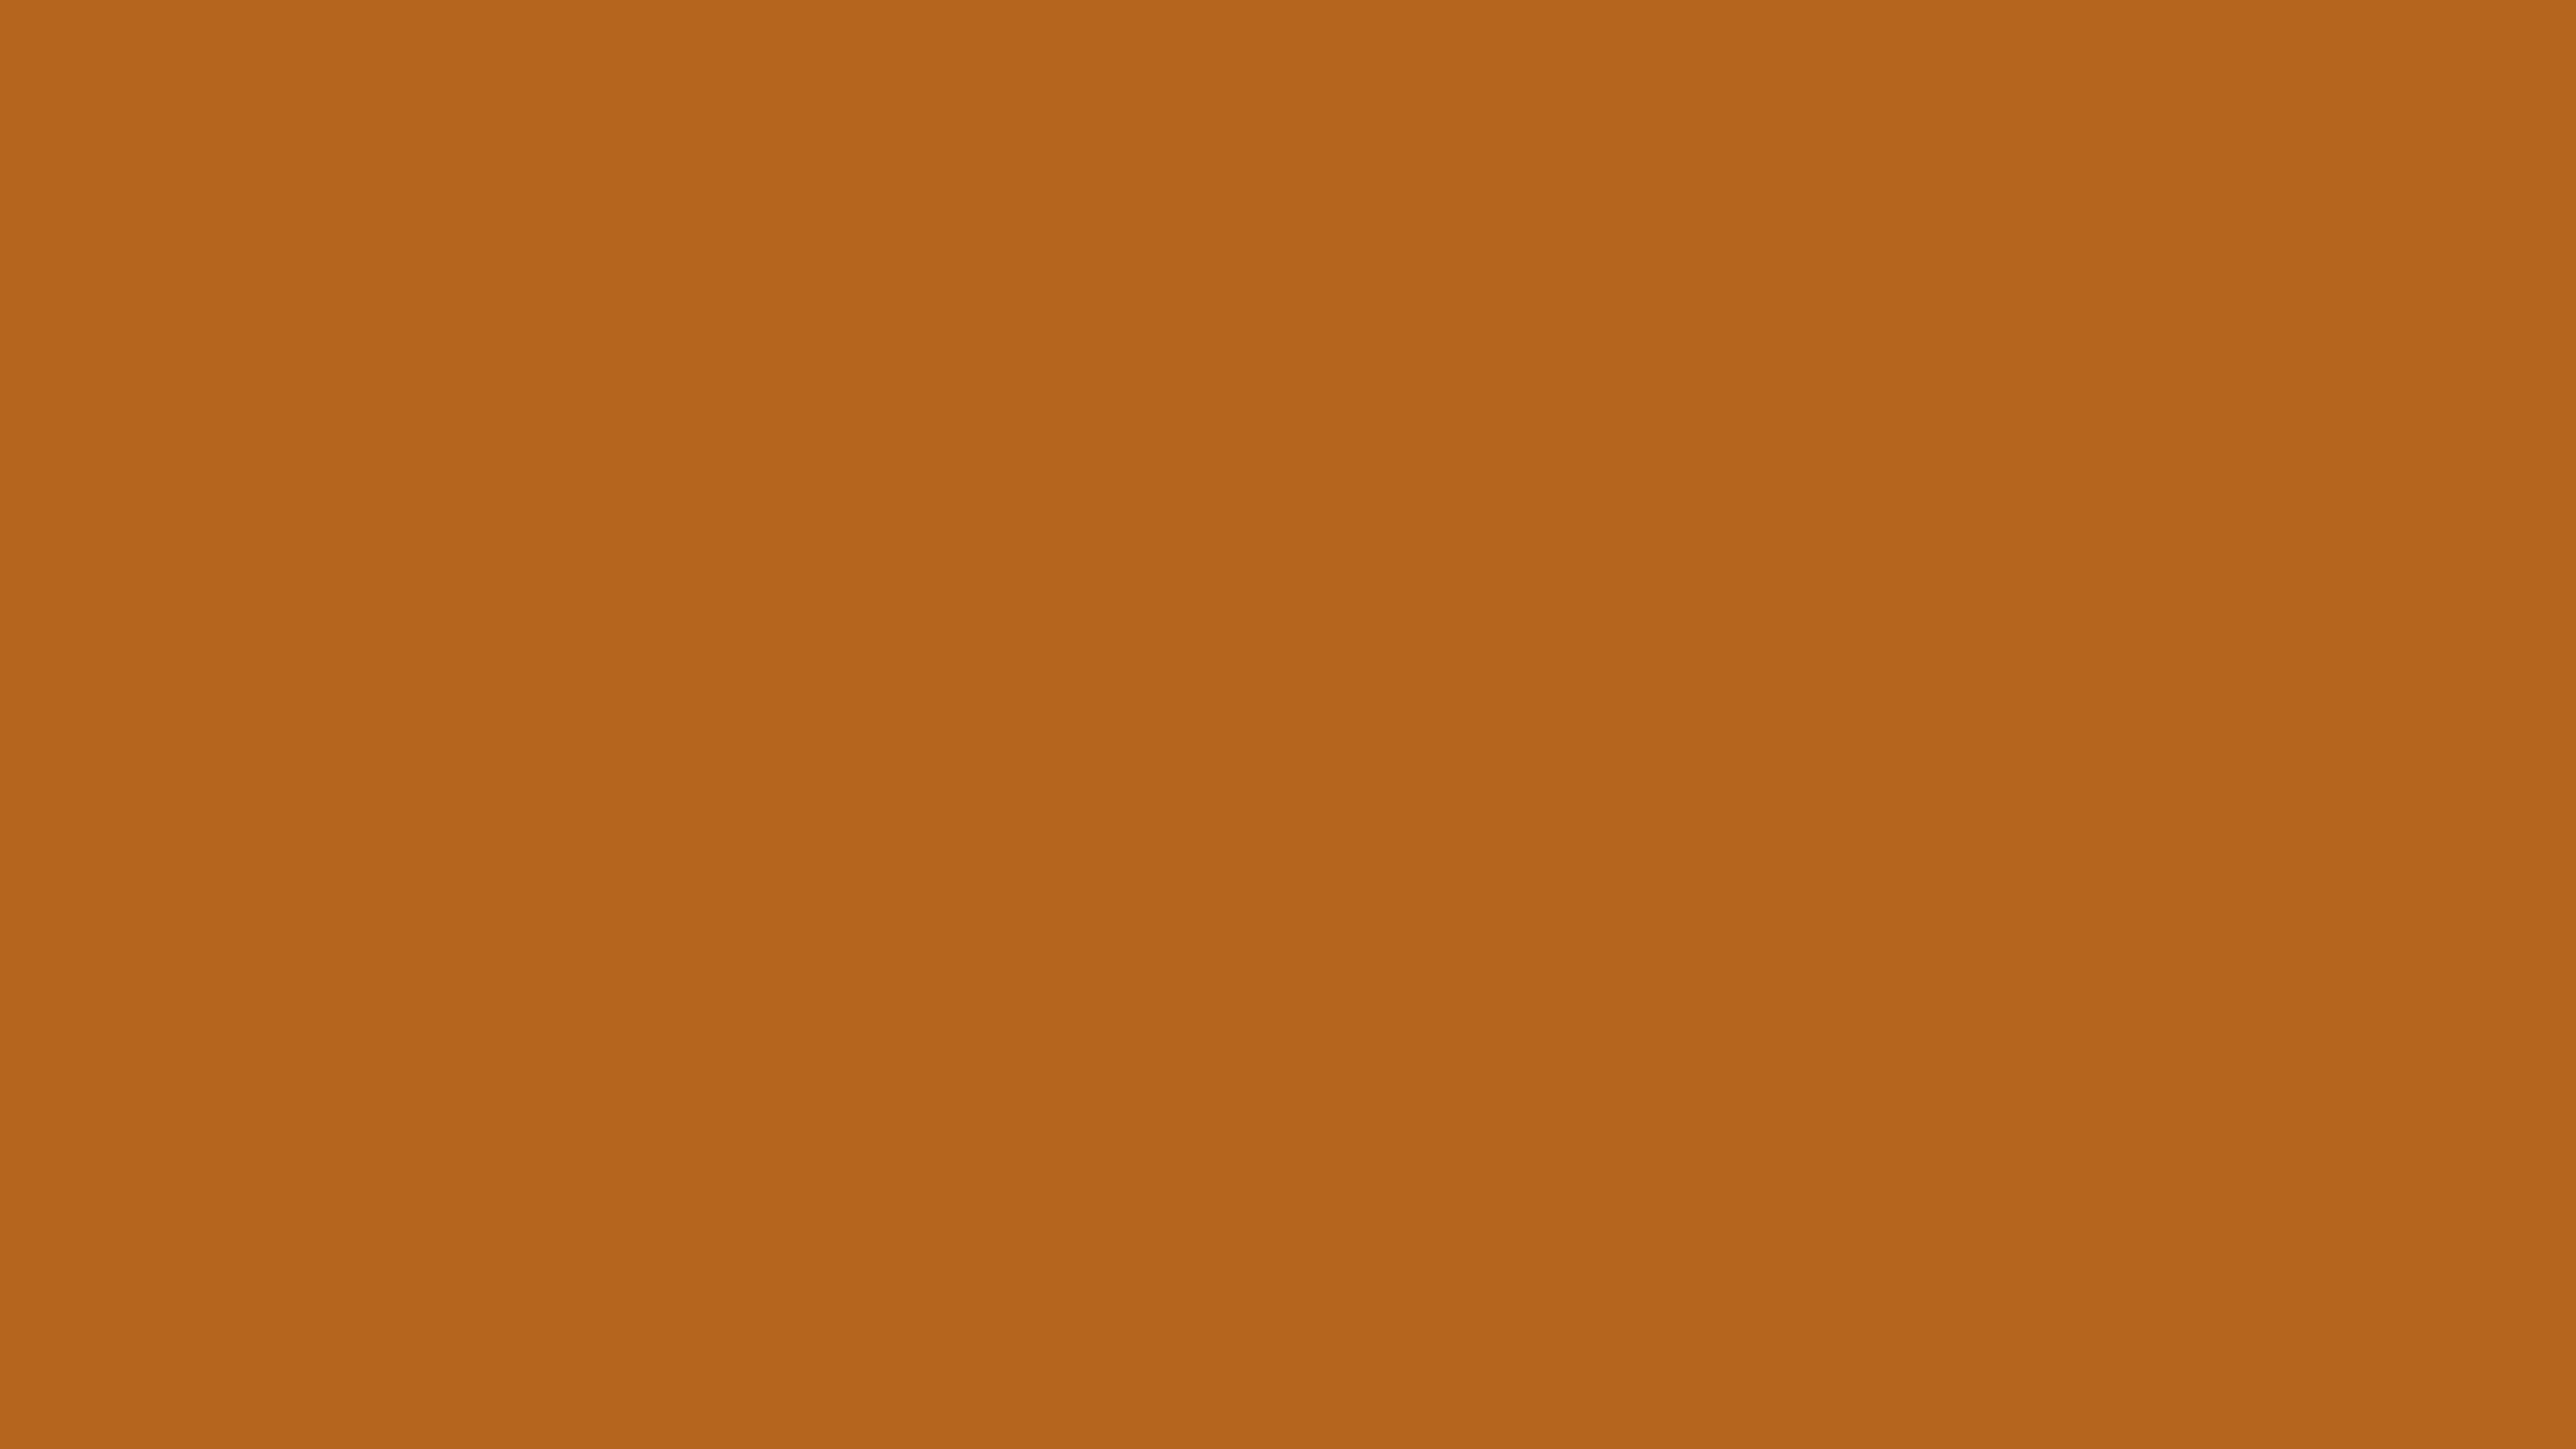 4096x2304 Light Brown Solid Color Background